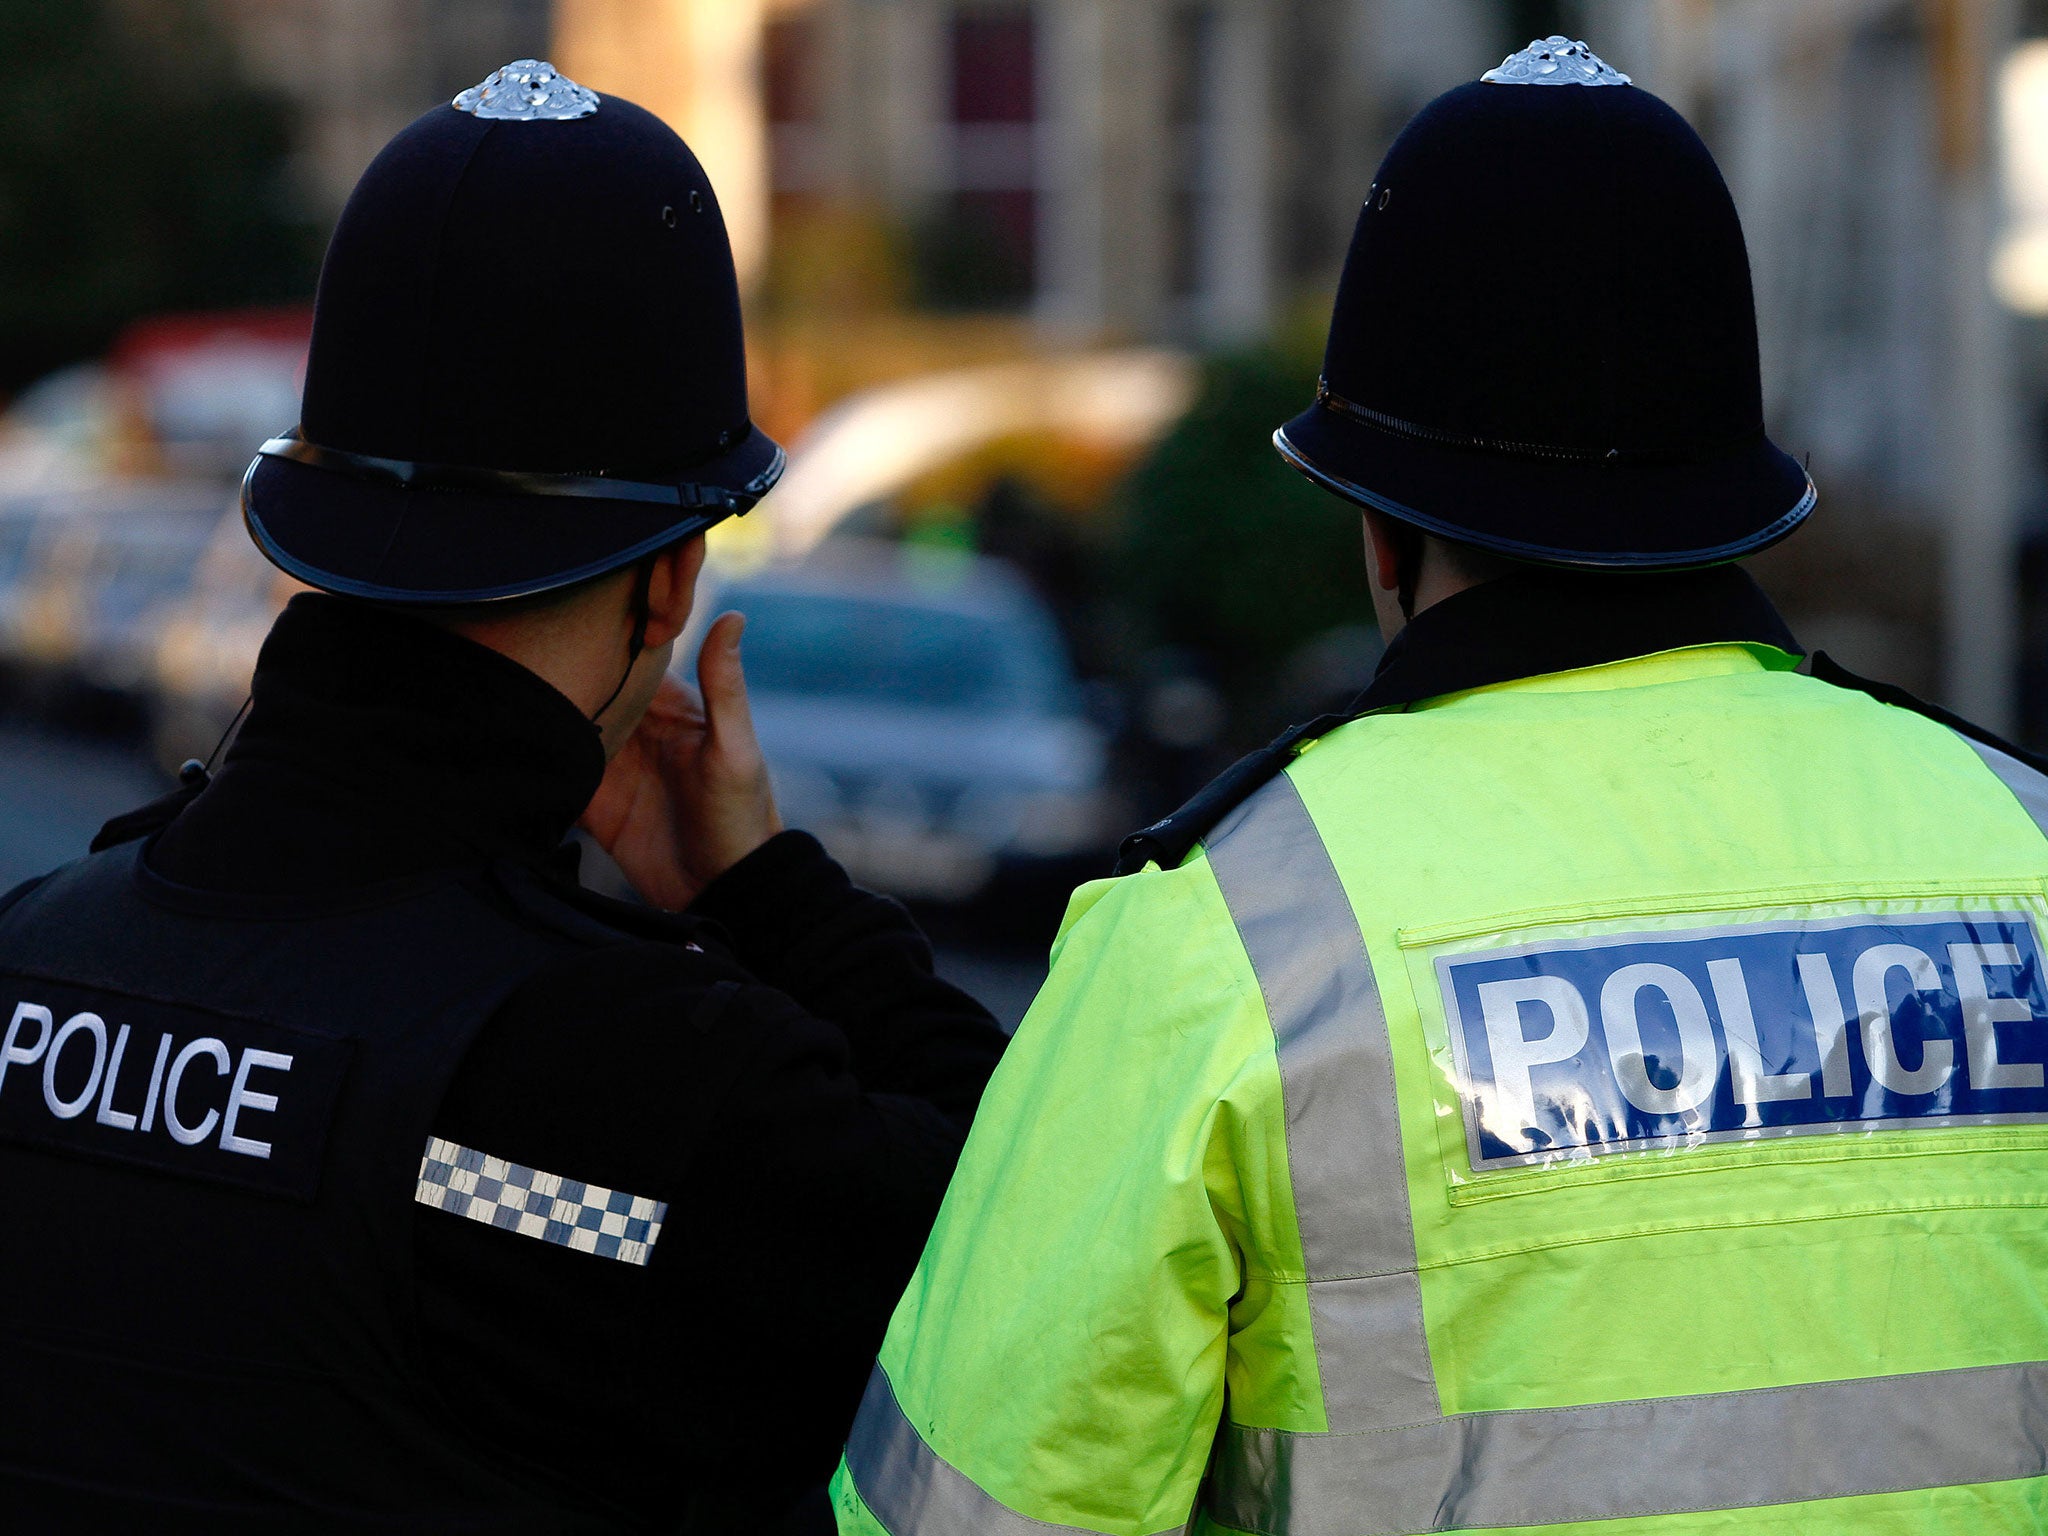 Police forces are being paid millions of pounds by local people, shopping centres and councils to provide officers, raising concerns about privatised policing